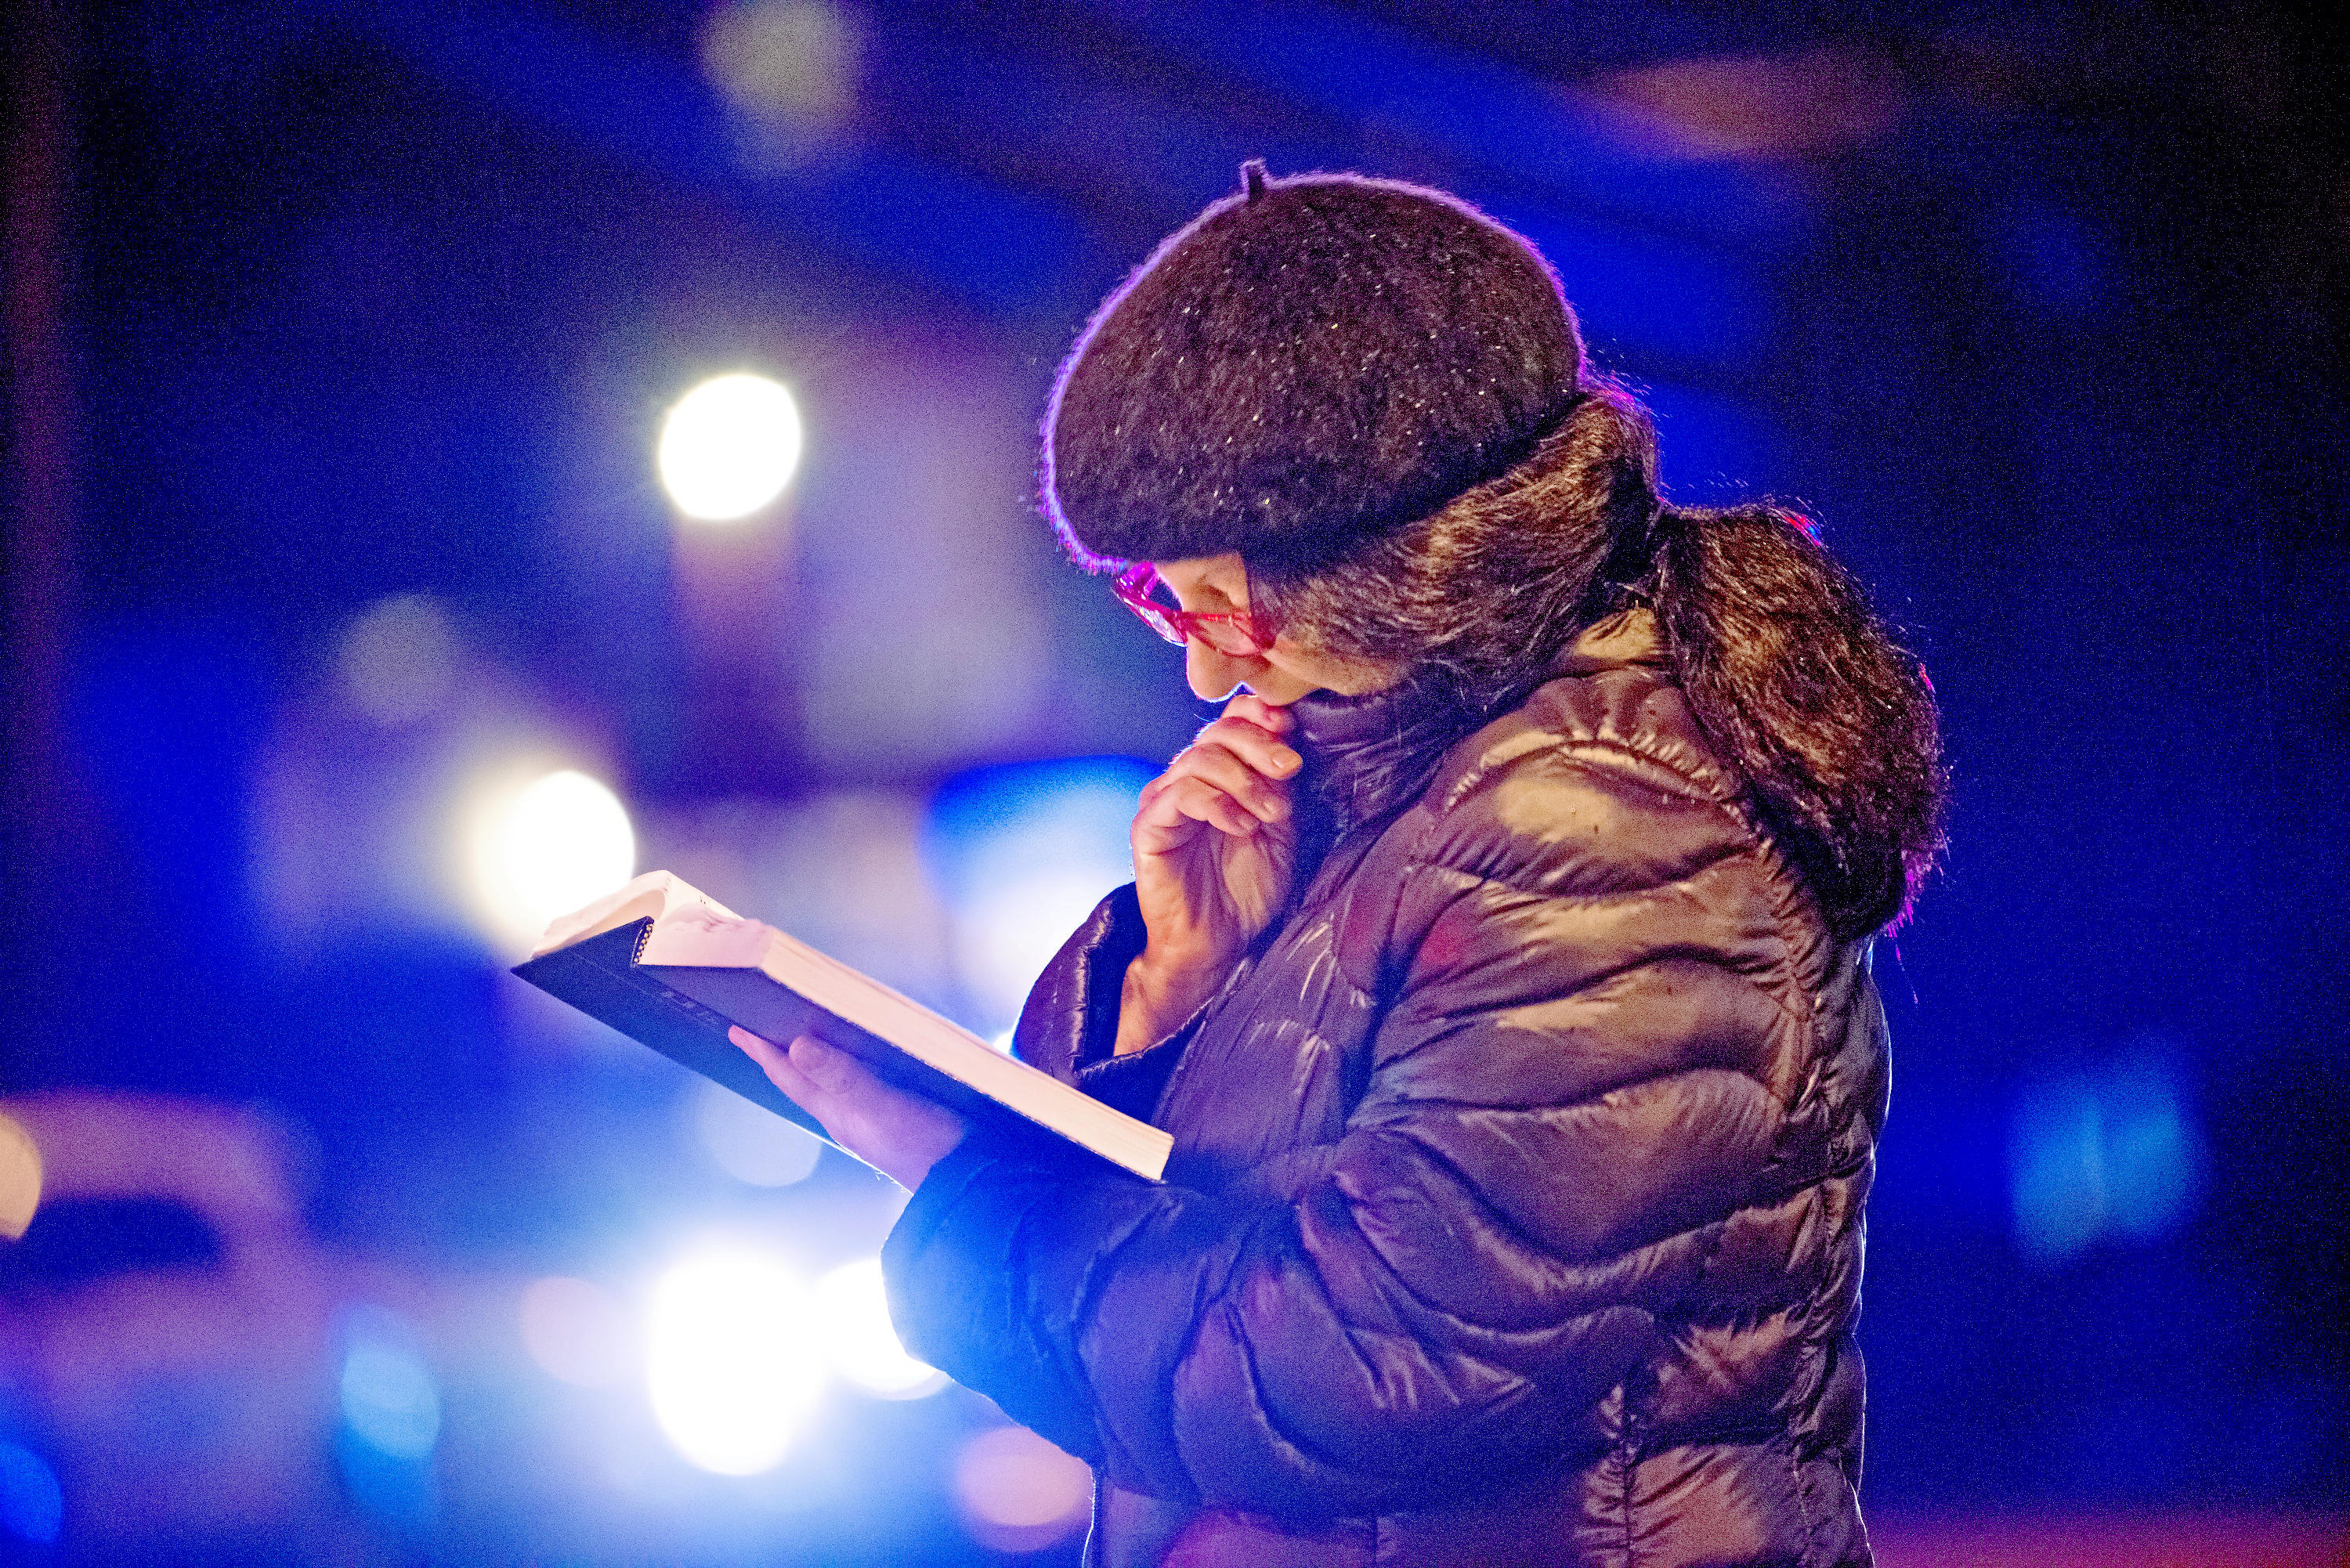 Nancy Clark of Squirrel Hill, reads from the Tehillim, as police lights flash and rain soaks the pages, yards away from Tree of Life Congregation, on Saturday, Oct. 27, 2018, in the Squirrel Hill section of Pittsburgh. A shooter opened fire at the synagogue, killing multiple people and wounding others in one of the deadliest attacks on Jews in U.S. history.  (Andrew Stein/Pittsburgh Post-Gazette via AP)
            